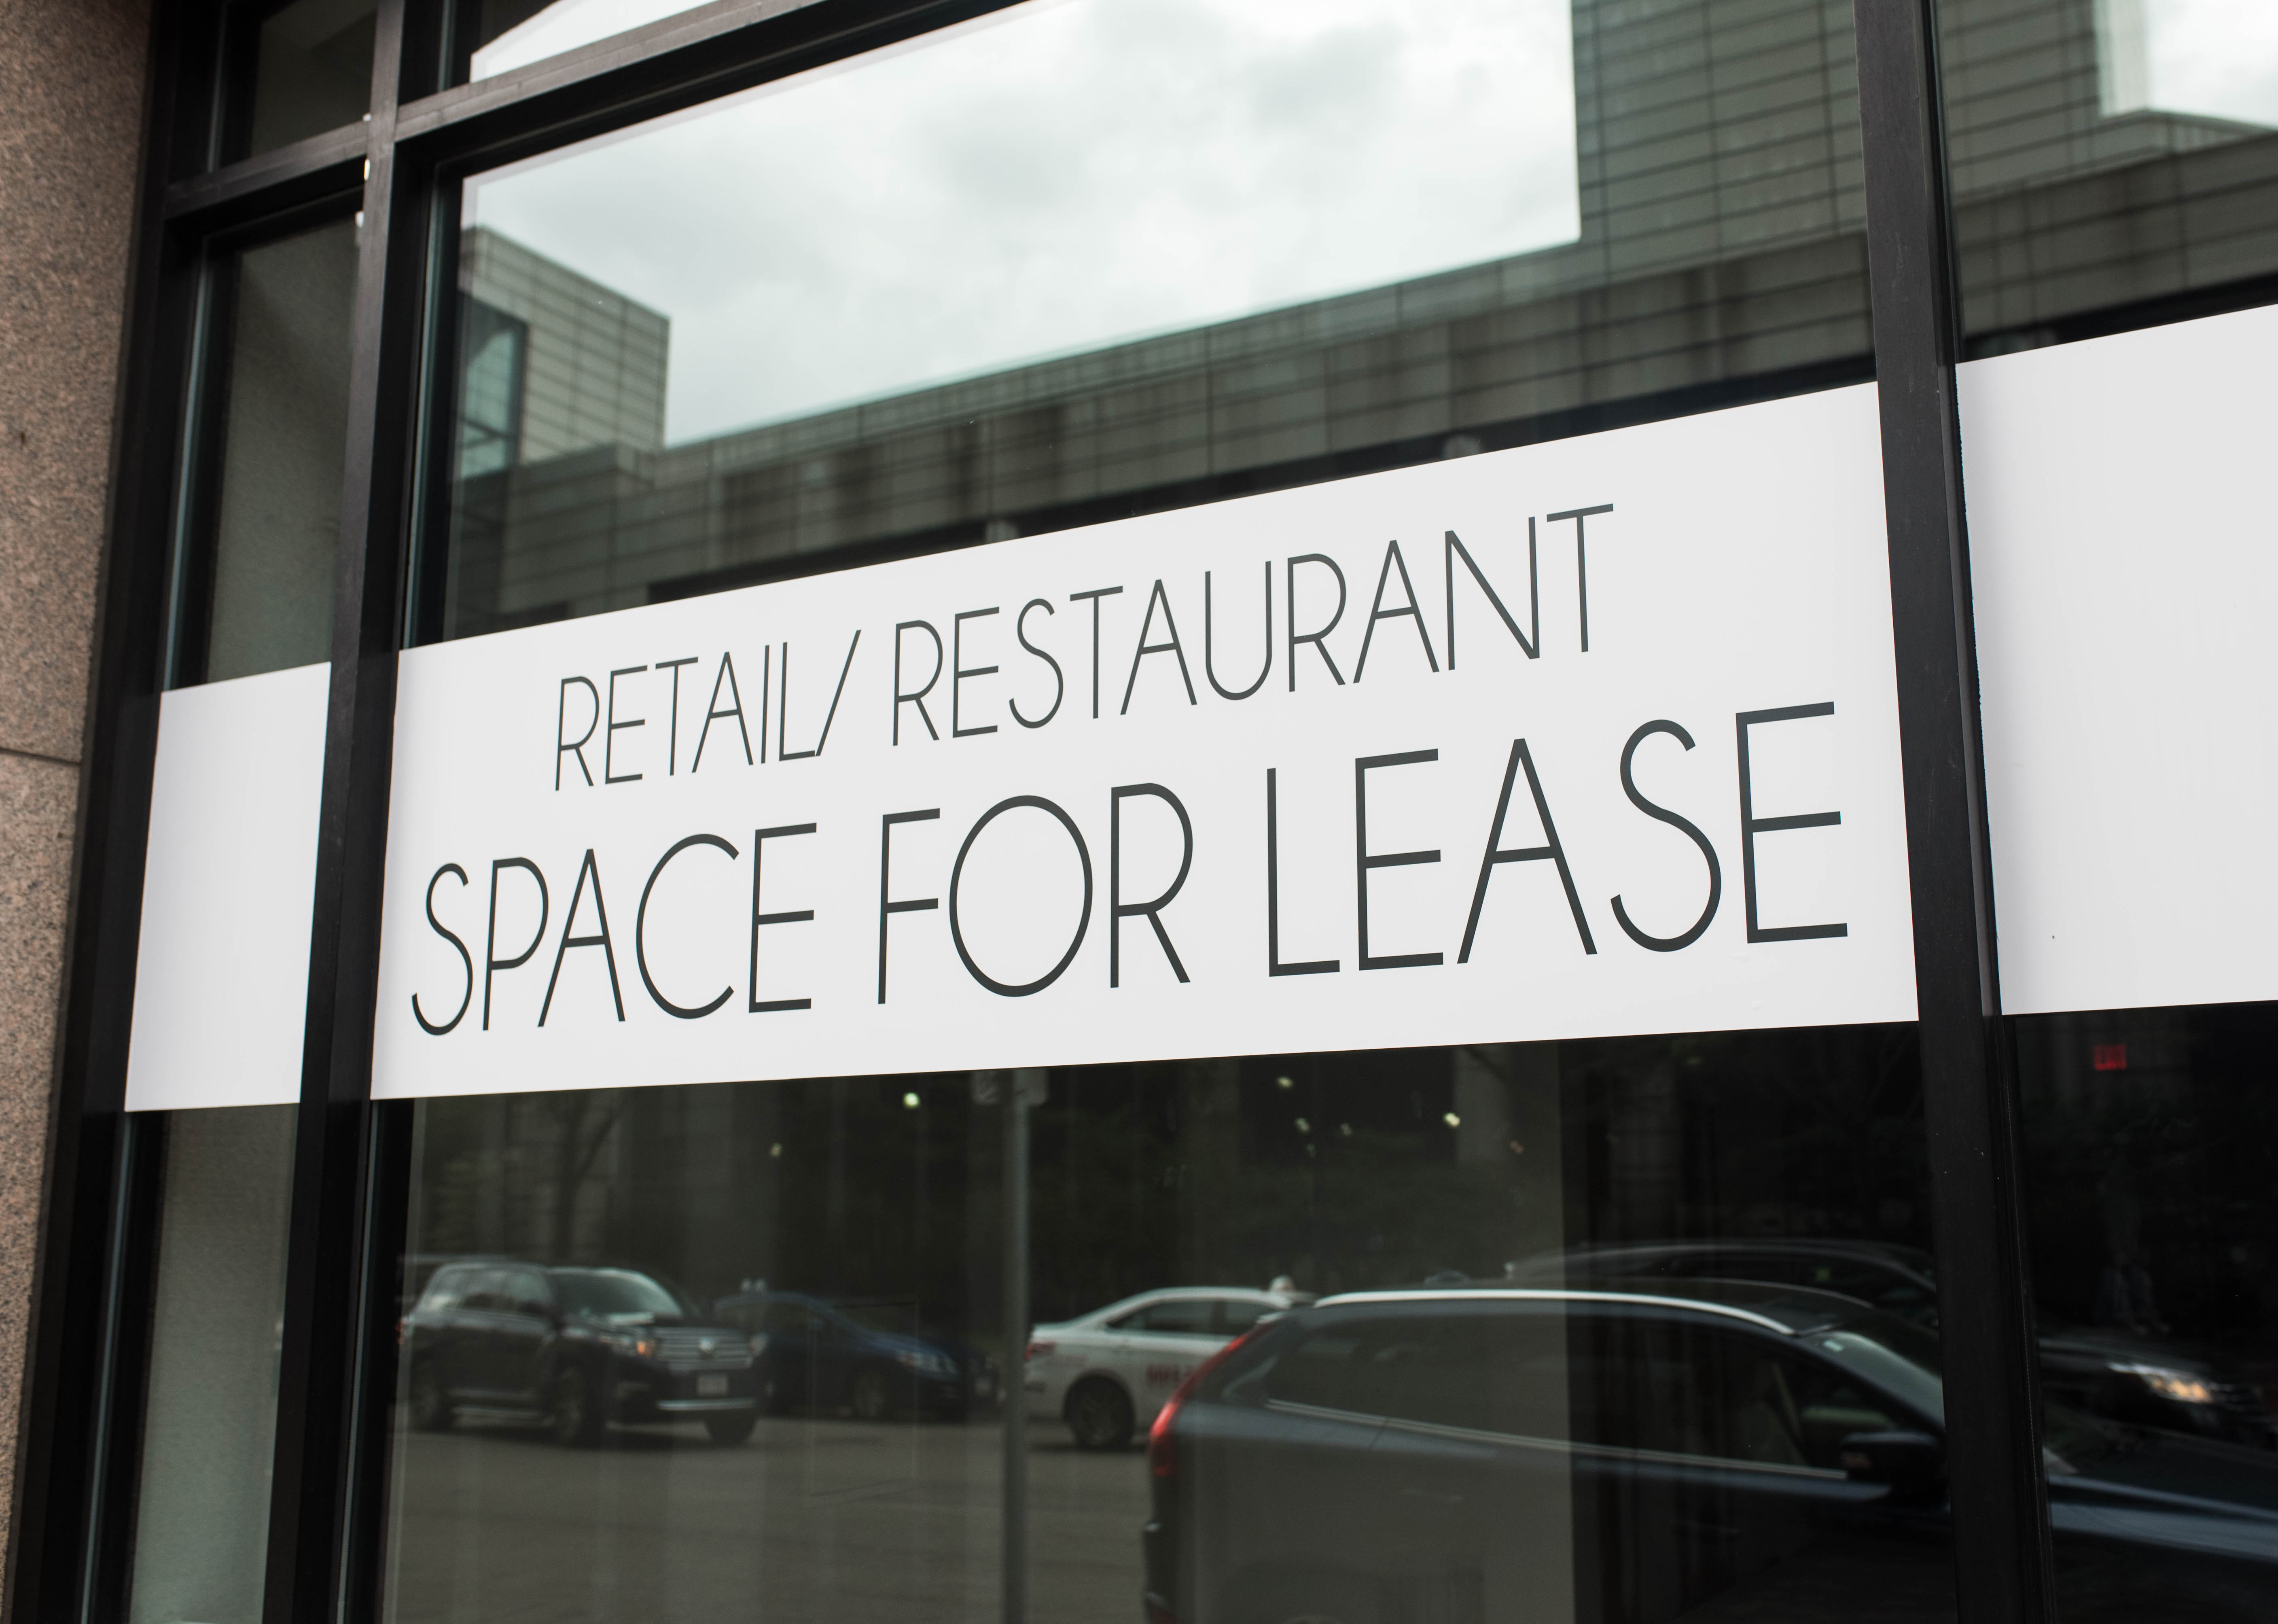 Outdoor window graphic space for lease